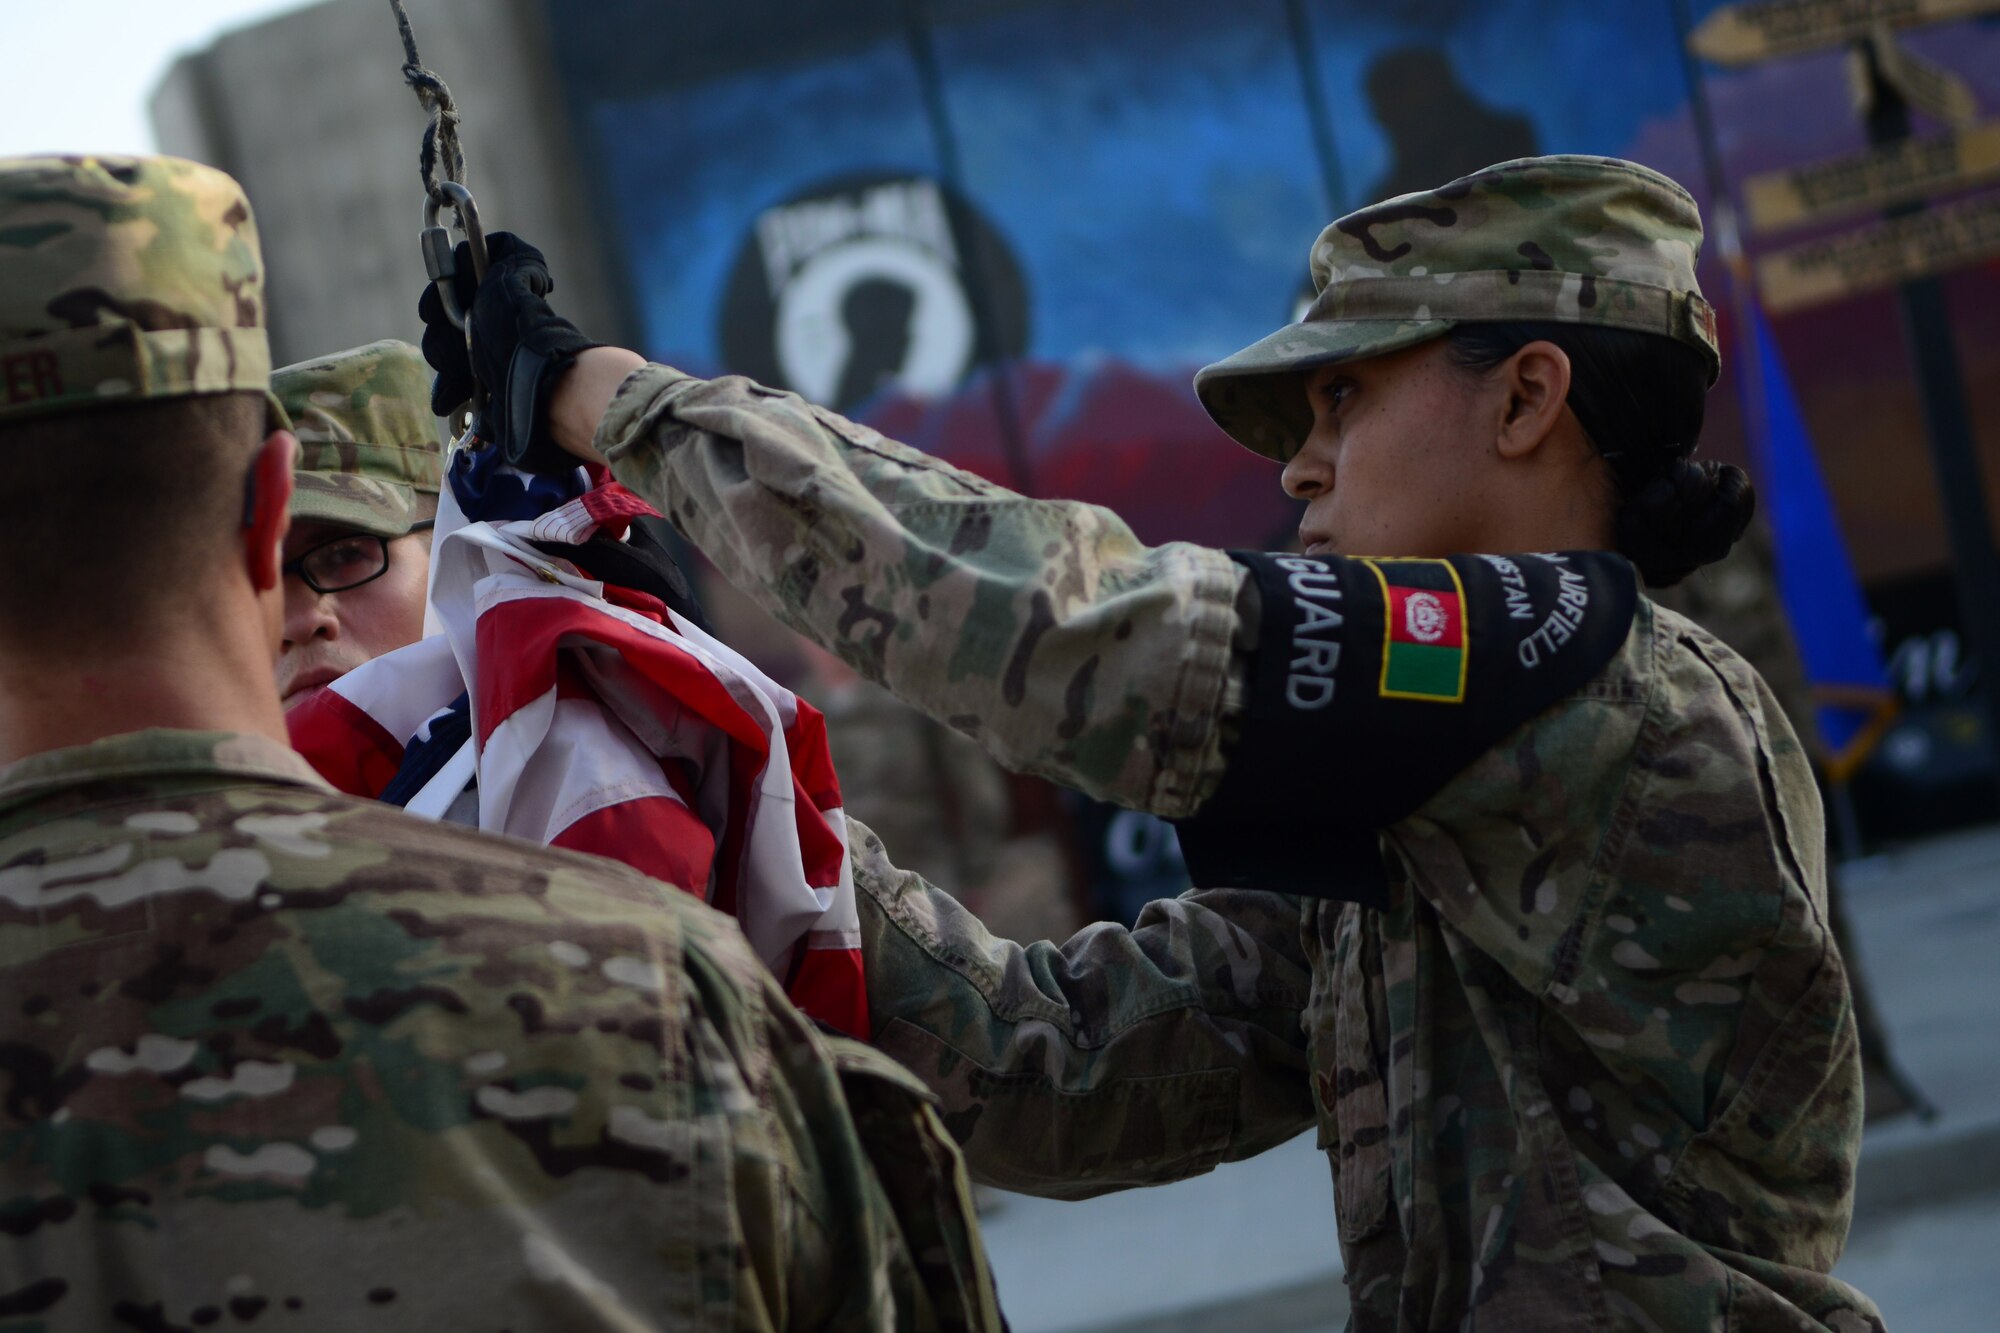 U.S. Air Force Staff Sgt. Talisa Williams, 455th Expeditionary Force Support Squadron, lowers a U.S. flag during a retreat ceremony at Bagram Airfield, Afghanistan Sept. 11, 2014.  Airmen participated in a Patriot's Day Retreat and reenlistment ceremony Sept. 11, 2014.  Patriot's Day is an annual observance to remember those who were injured or died during the attacks on Sept. 11, 2001. (U.S. Air Force photo by Staff Sgt. Evelyn Chavez)